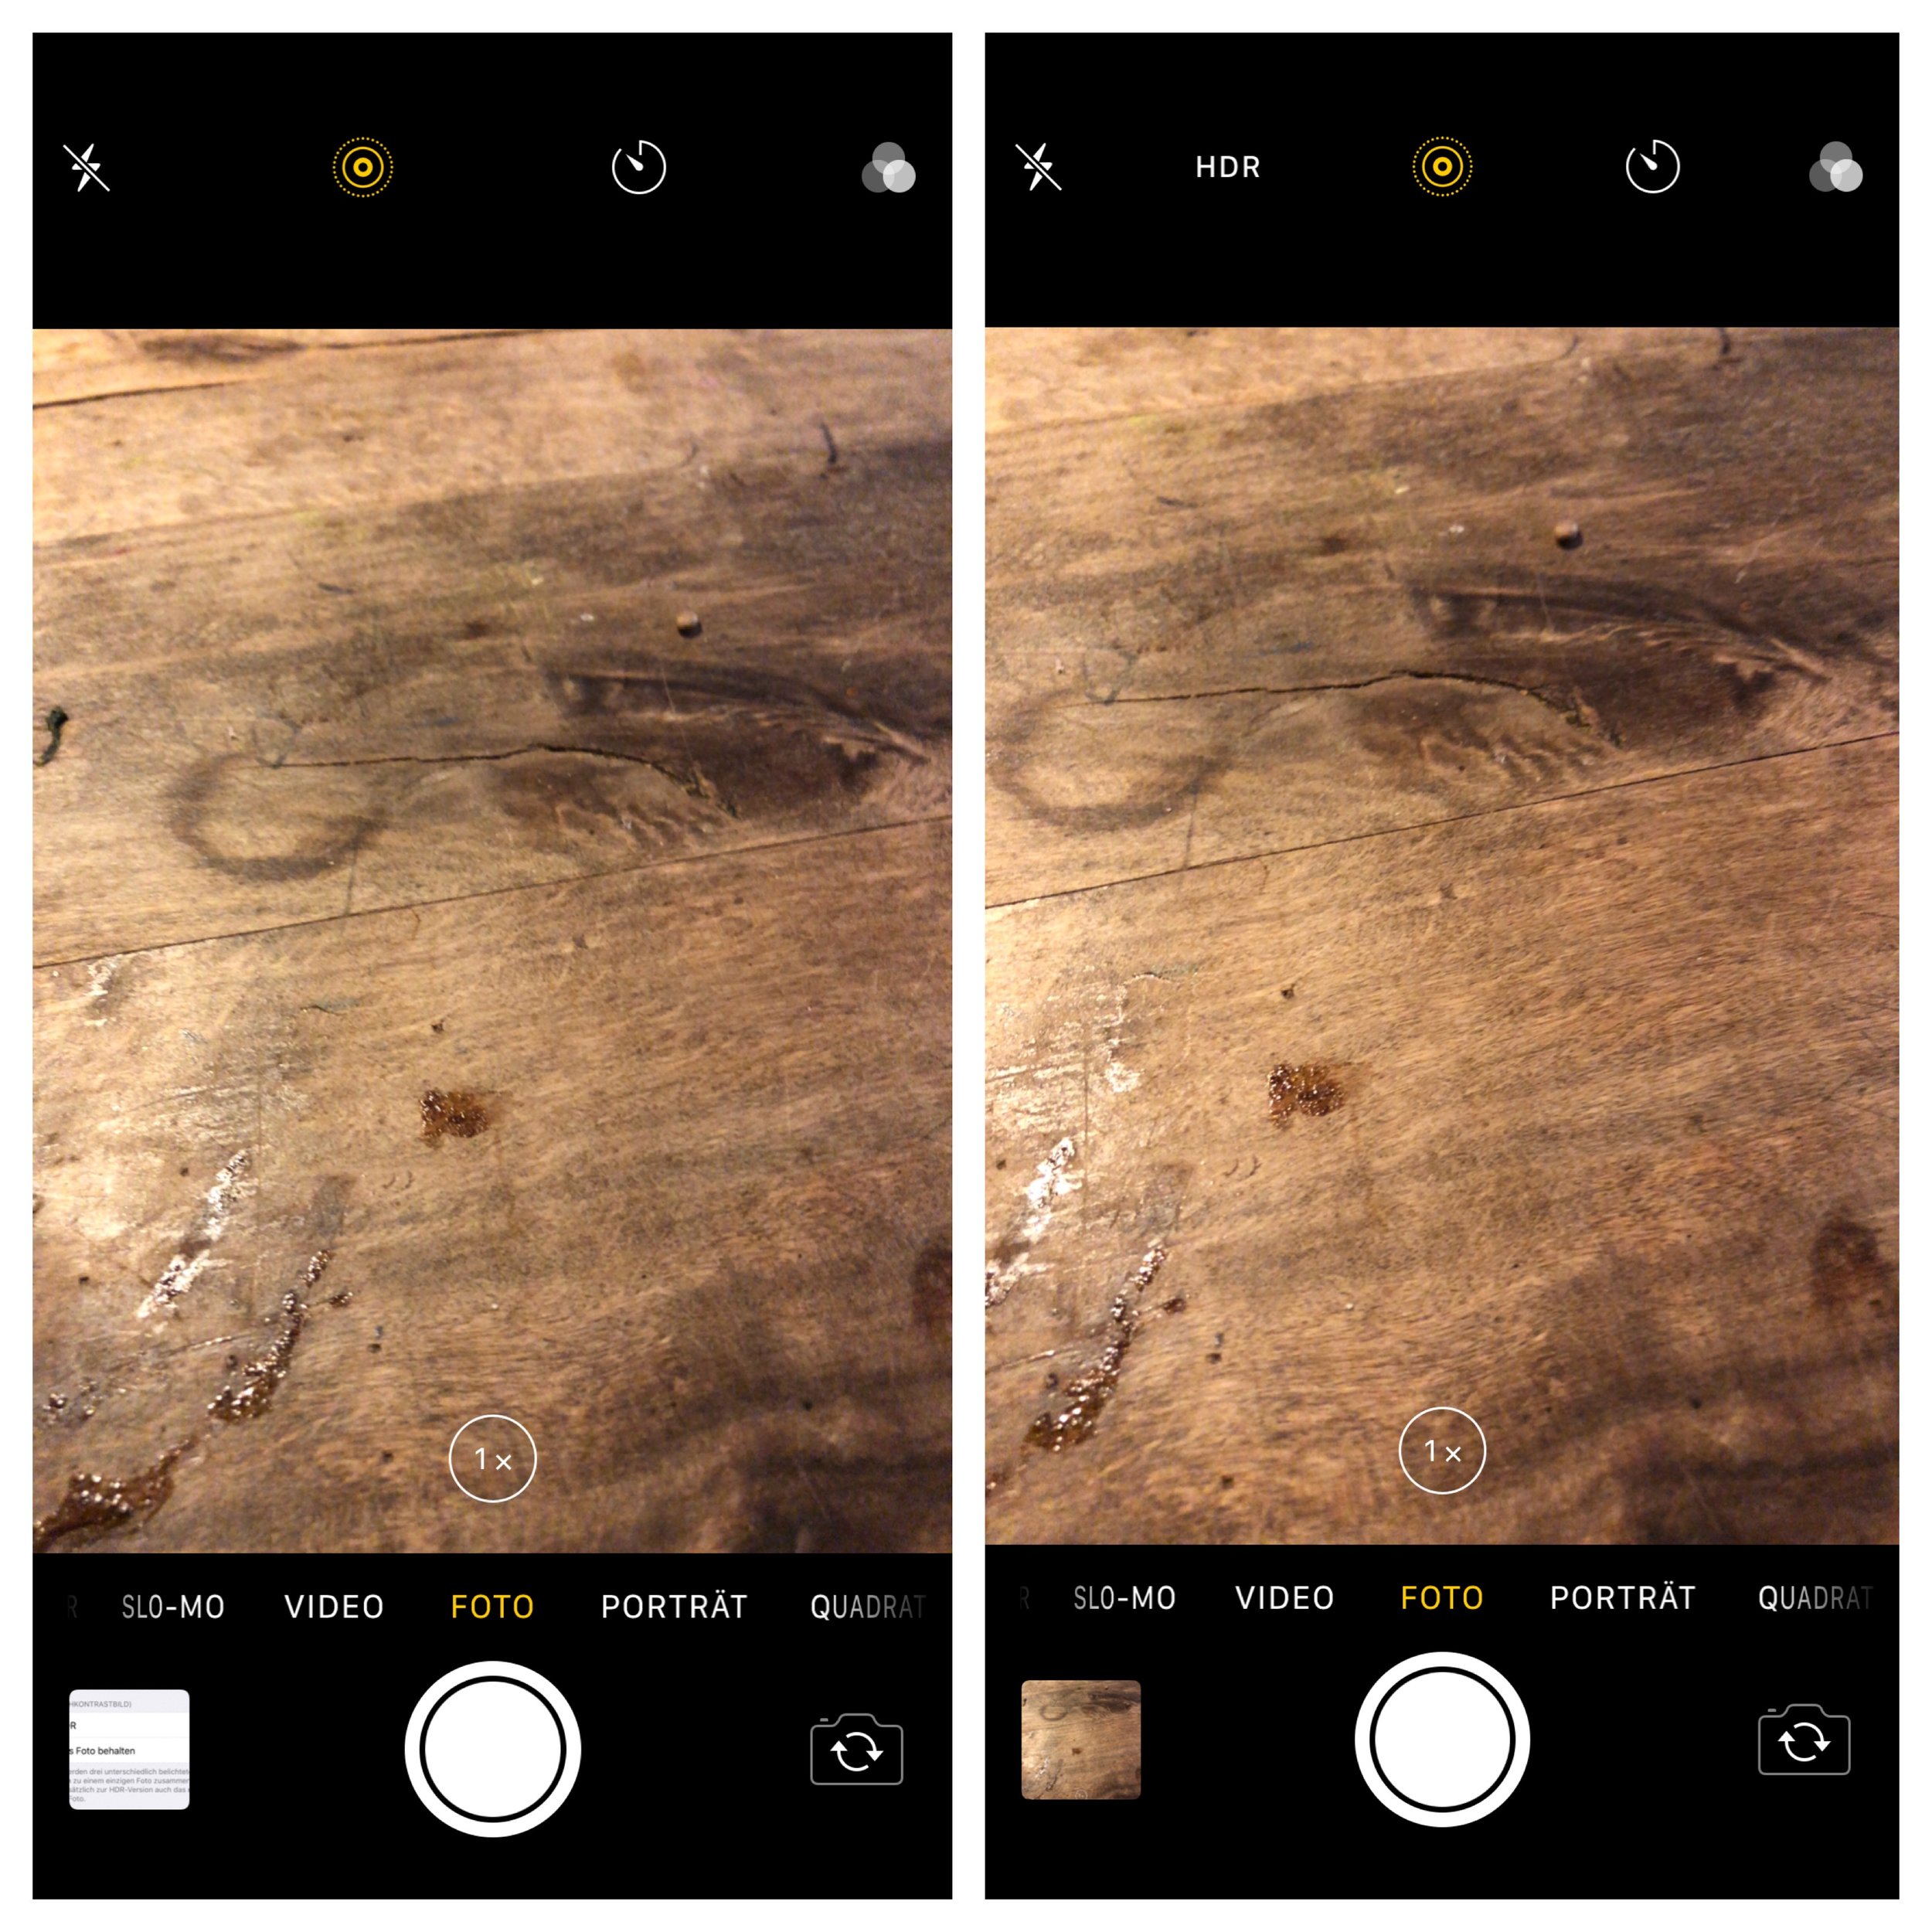 Iphone X Where Did The Hdr Option Go — Zeipad